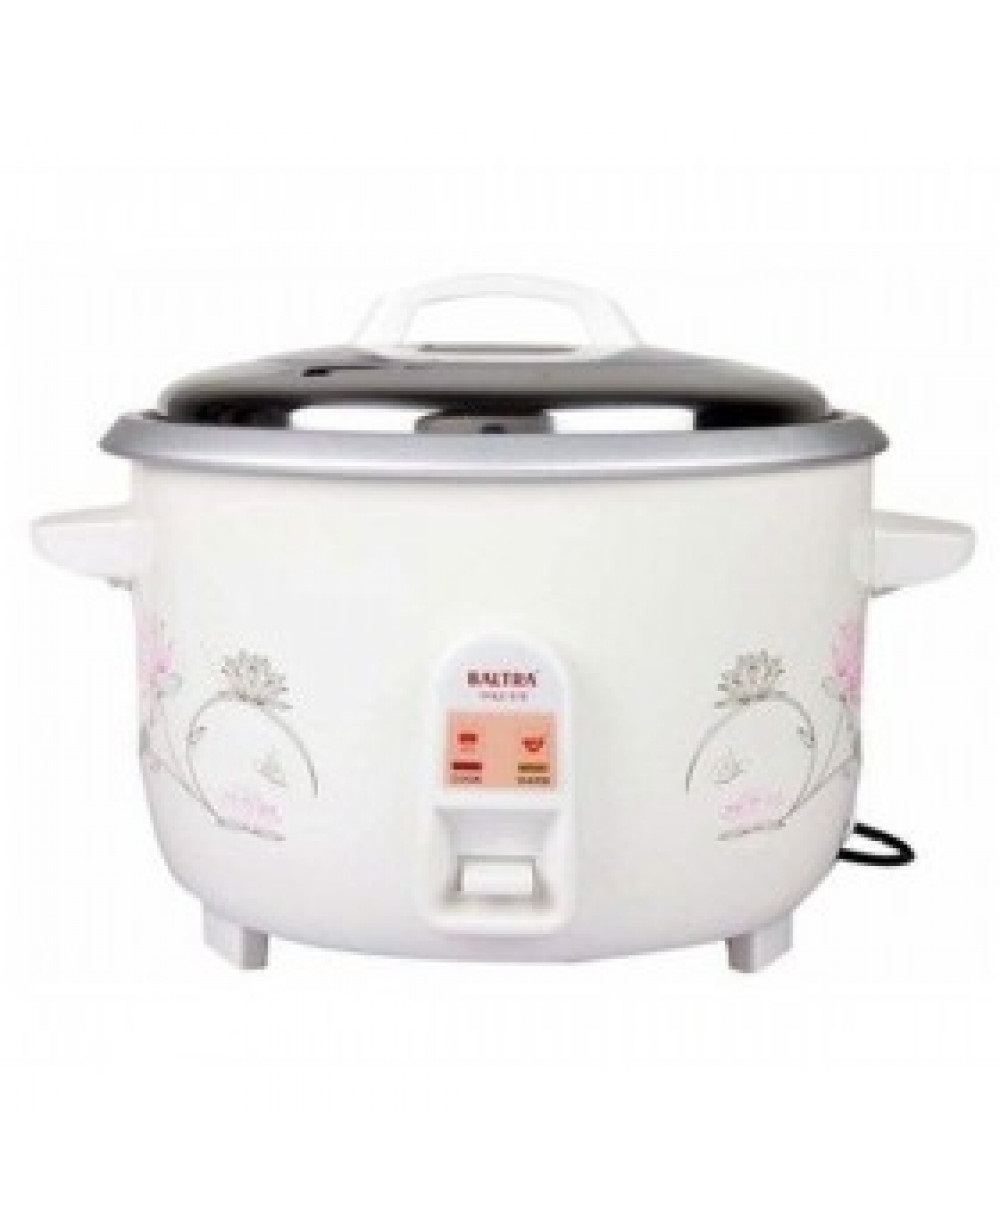 Baltra Star Commercial Rice Cooker